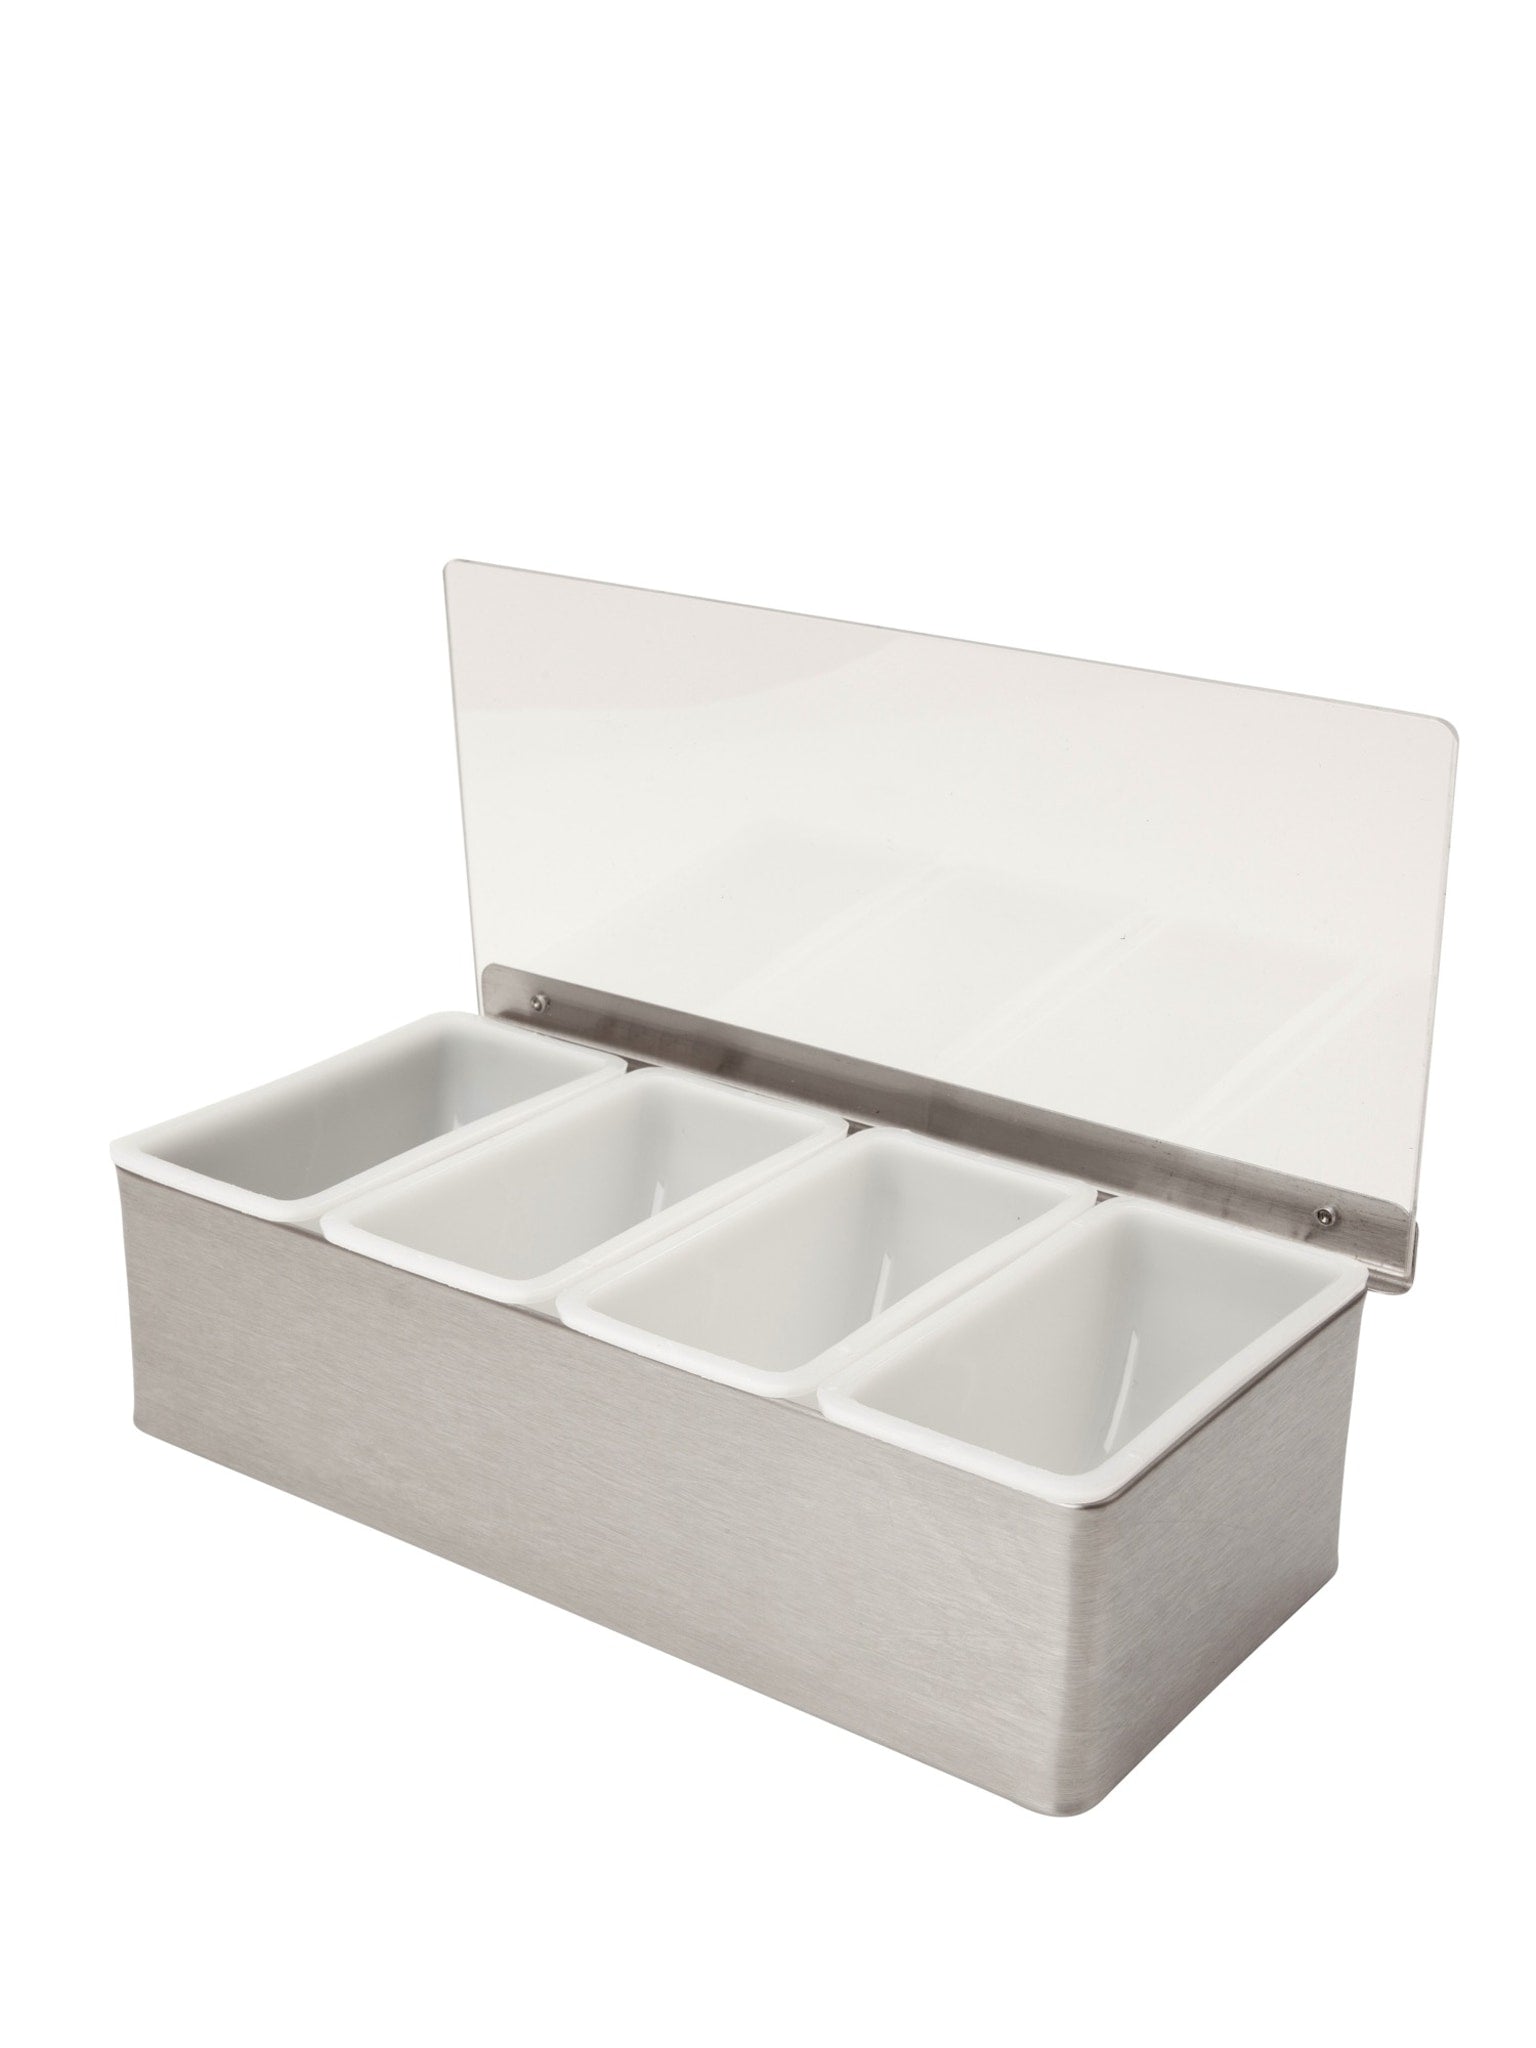 Keep your bartending tools organized with this stainless steel bar organizer with 4 compartments.